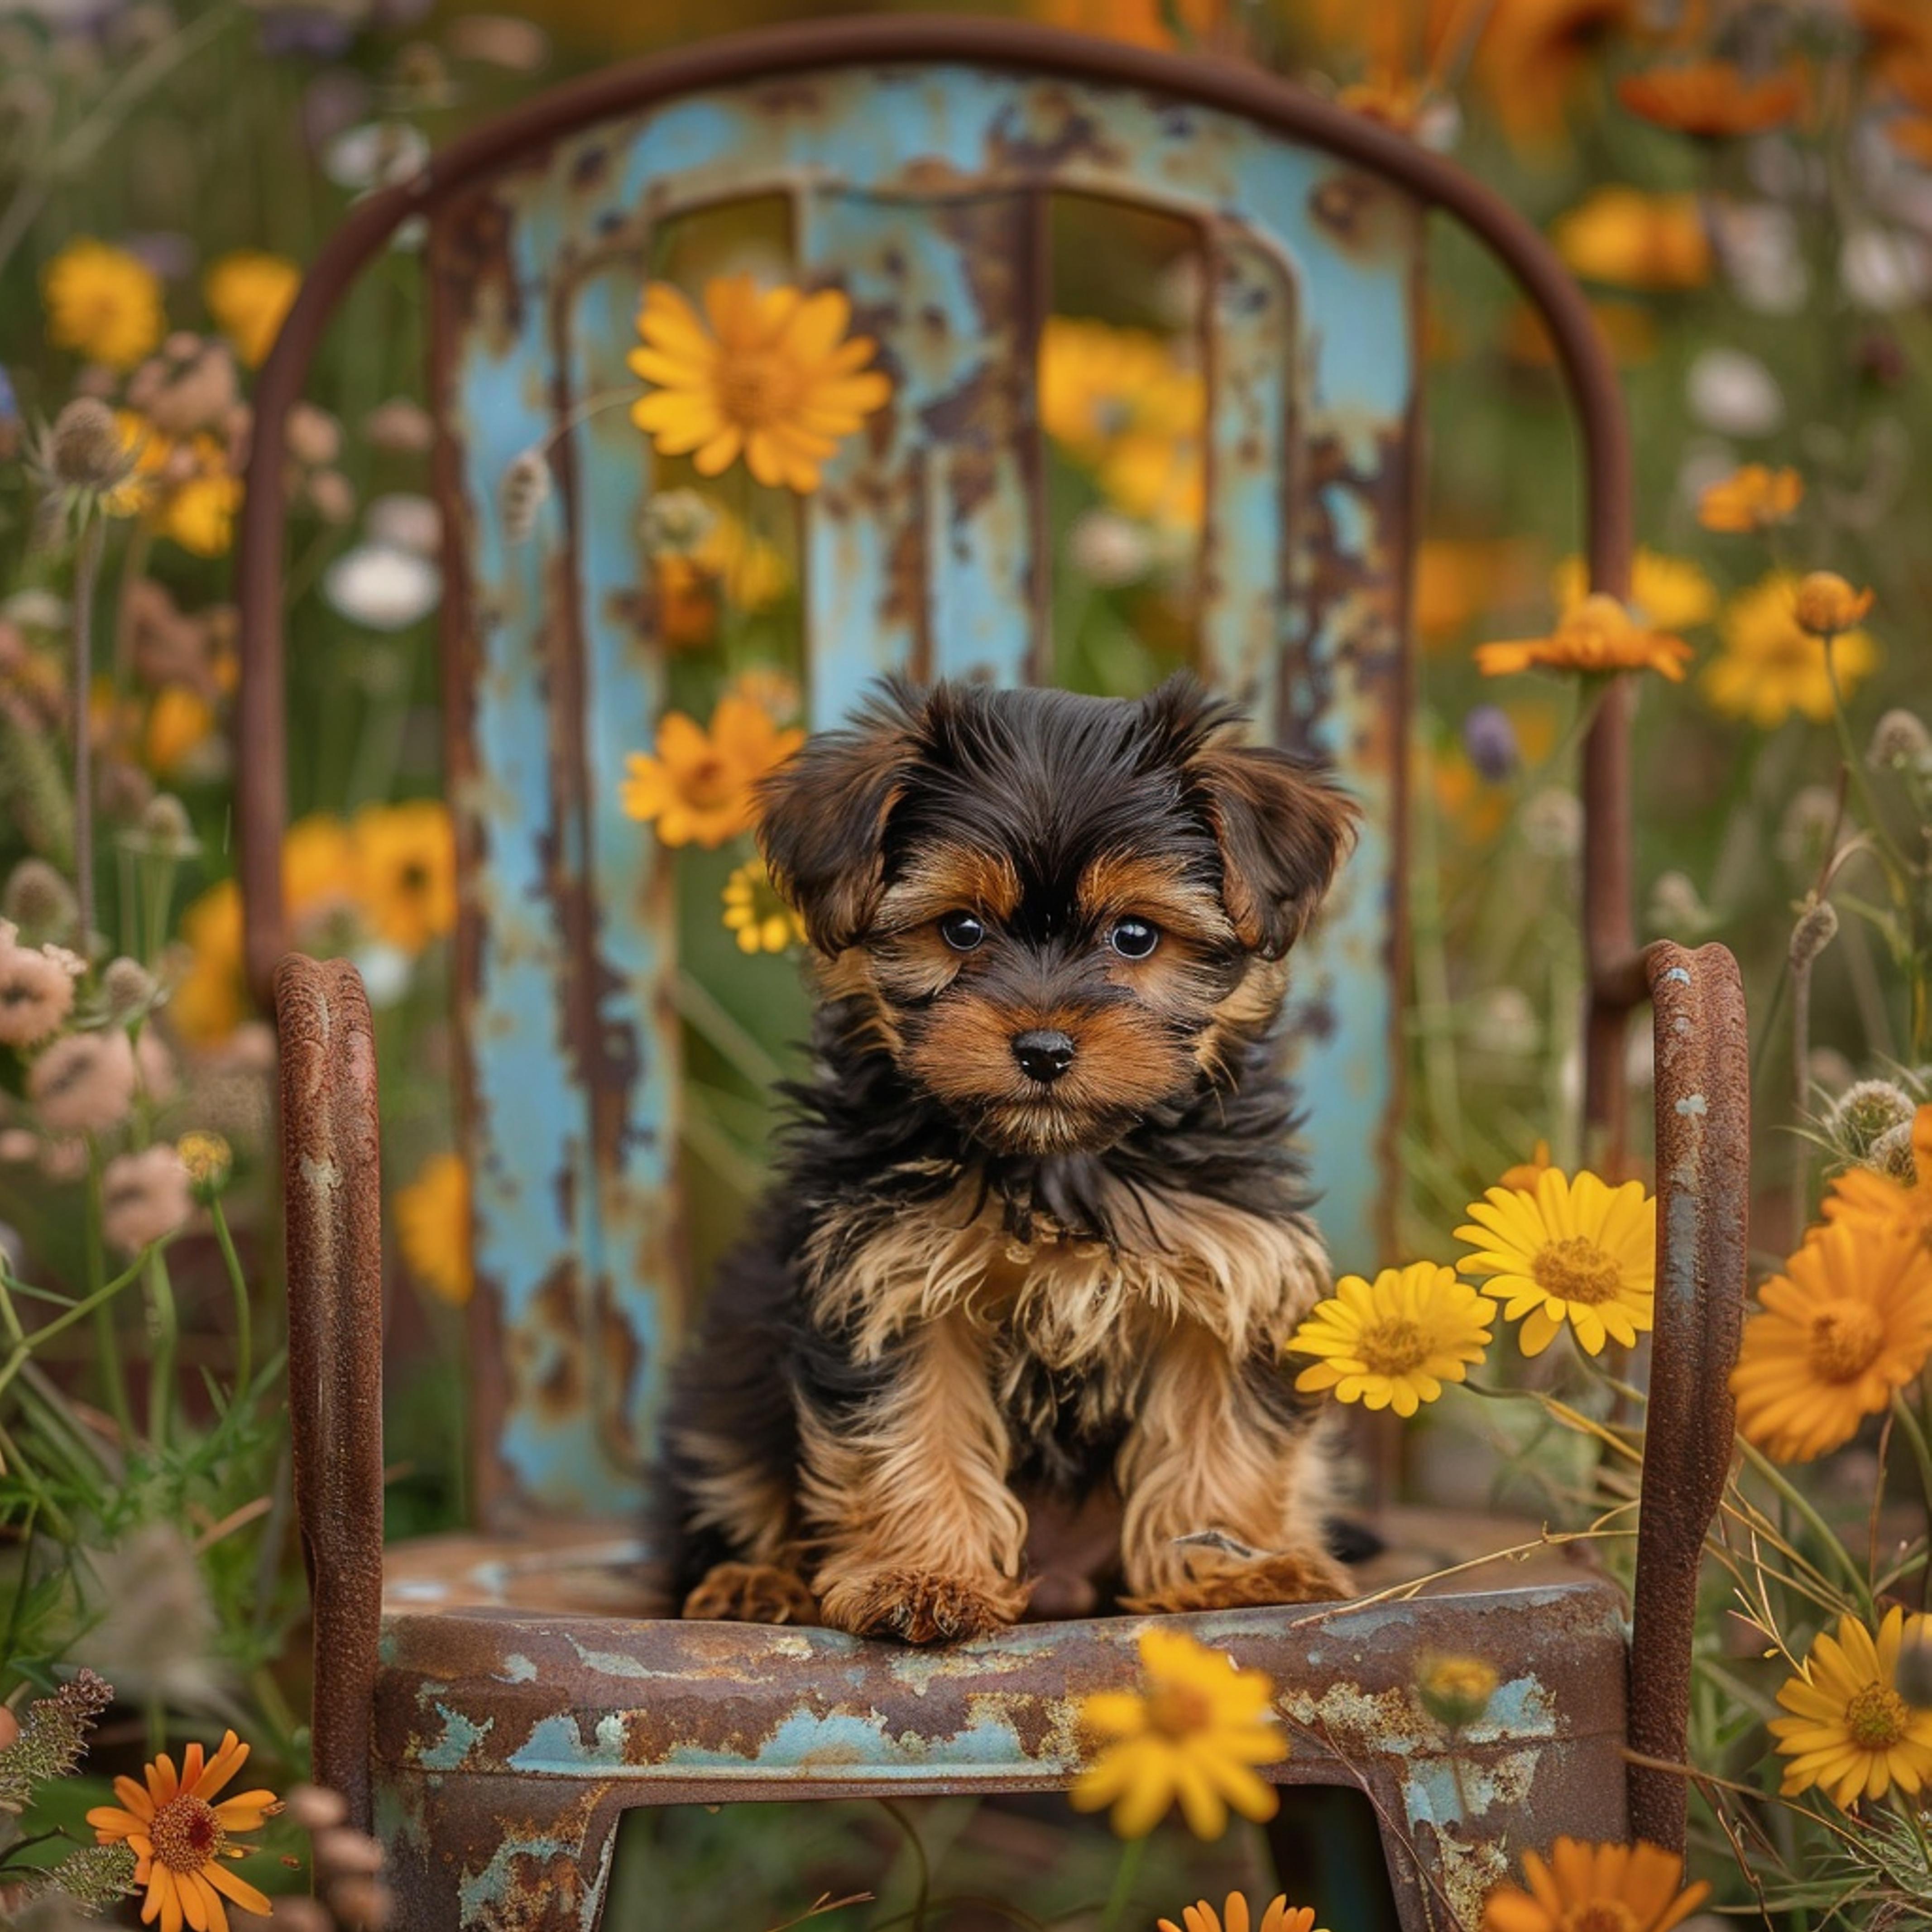 Lord Fauntleroy Portrait Photograph - F. - Yorkie (Puppy, Dog, Portrait, Staged)